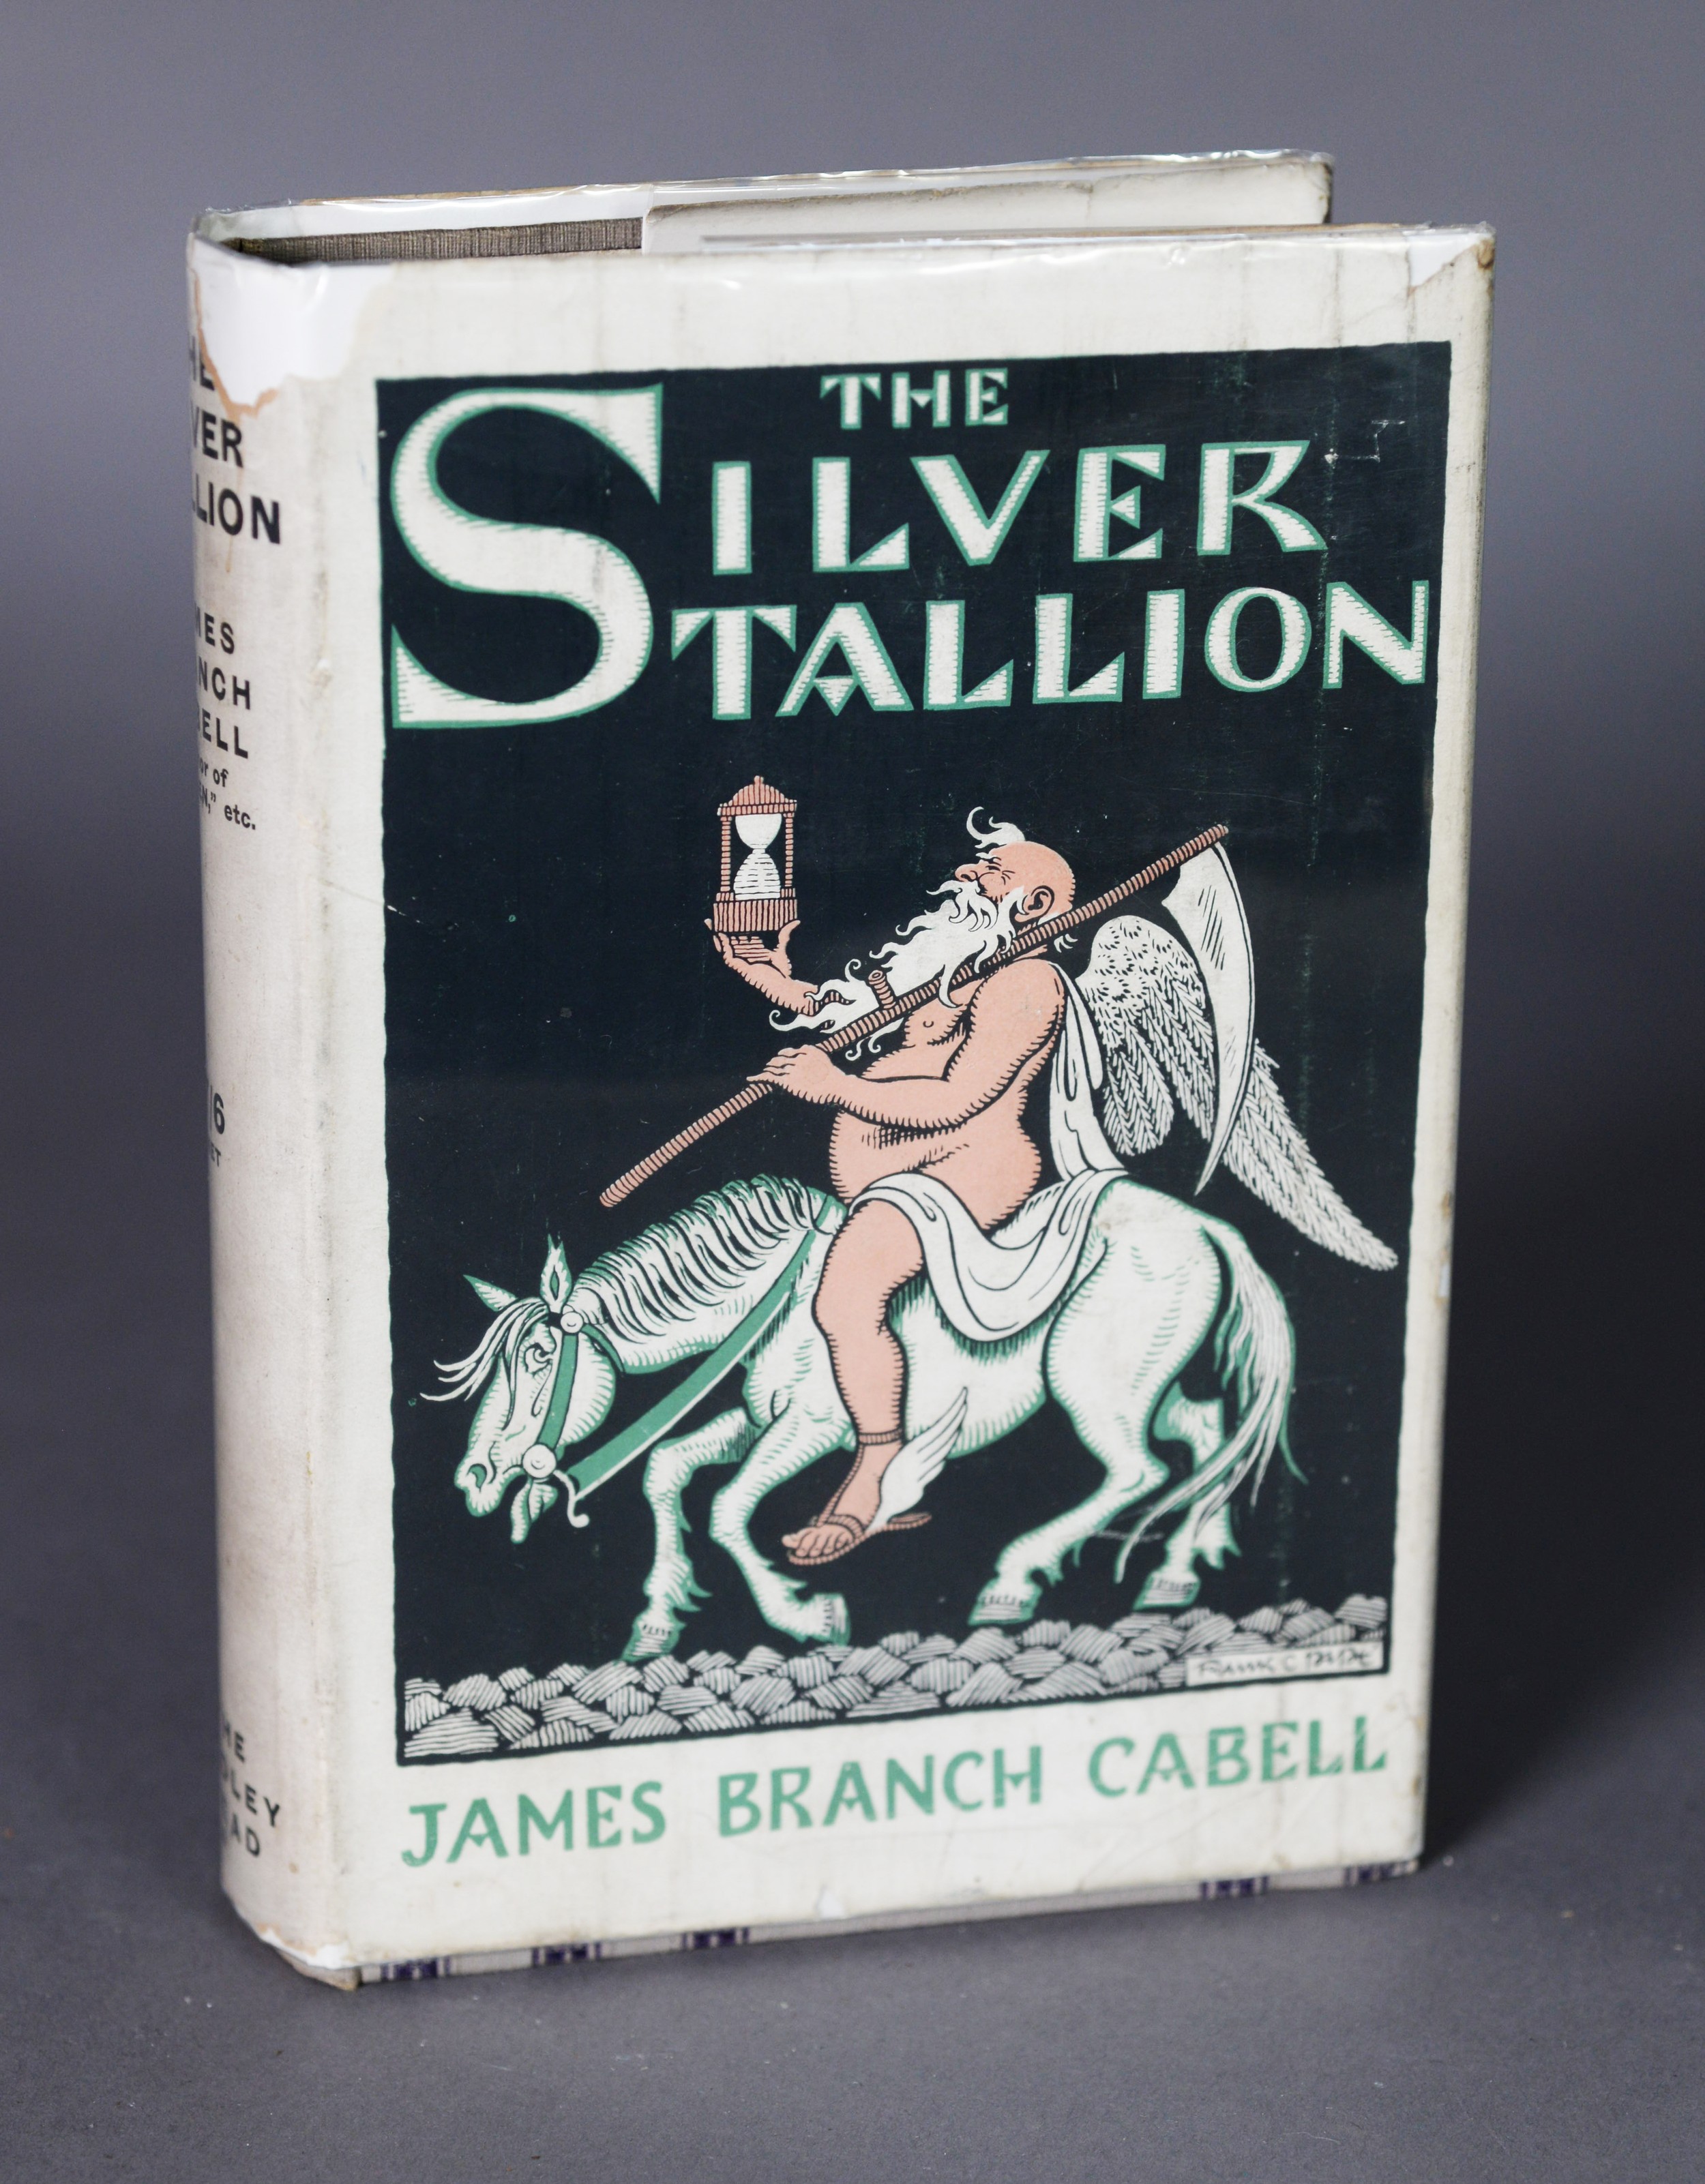 SUPERNATURAL FANTASY FICTION. James Branch Cabell - The Silver Stallion, The Bodley Head, 1926 1st